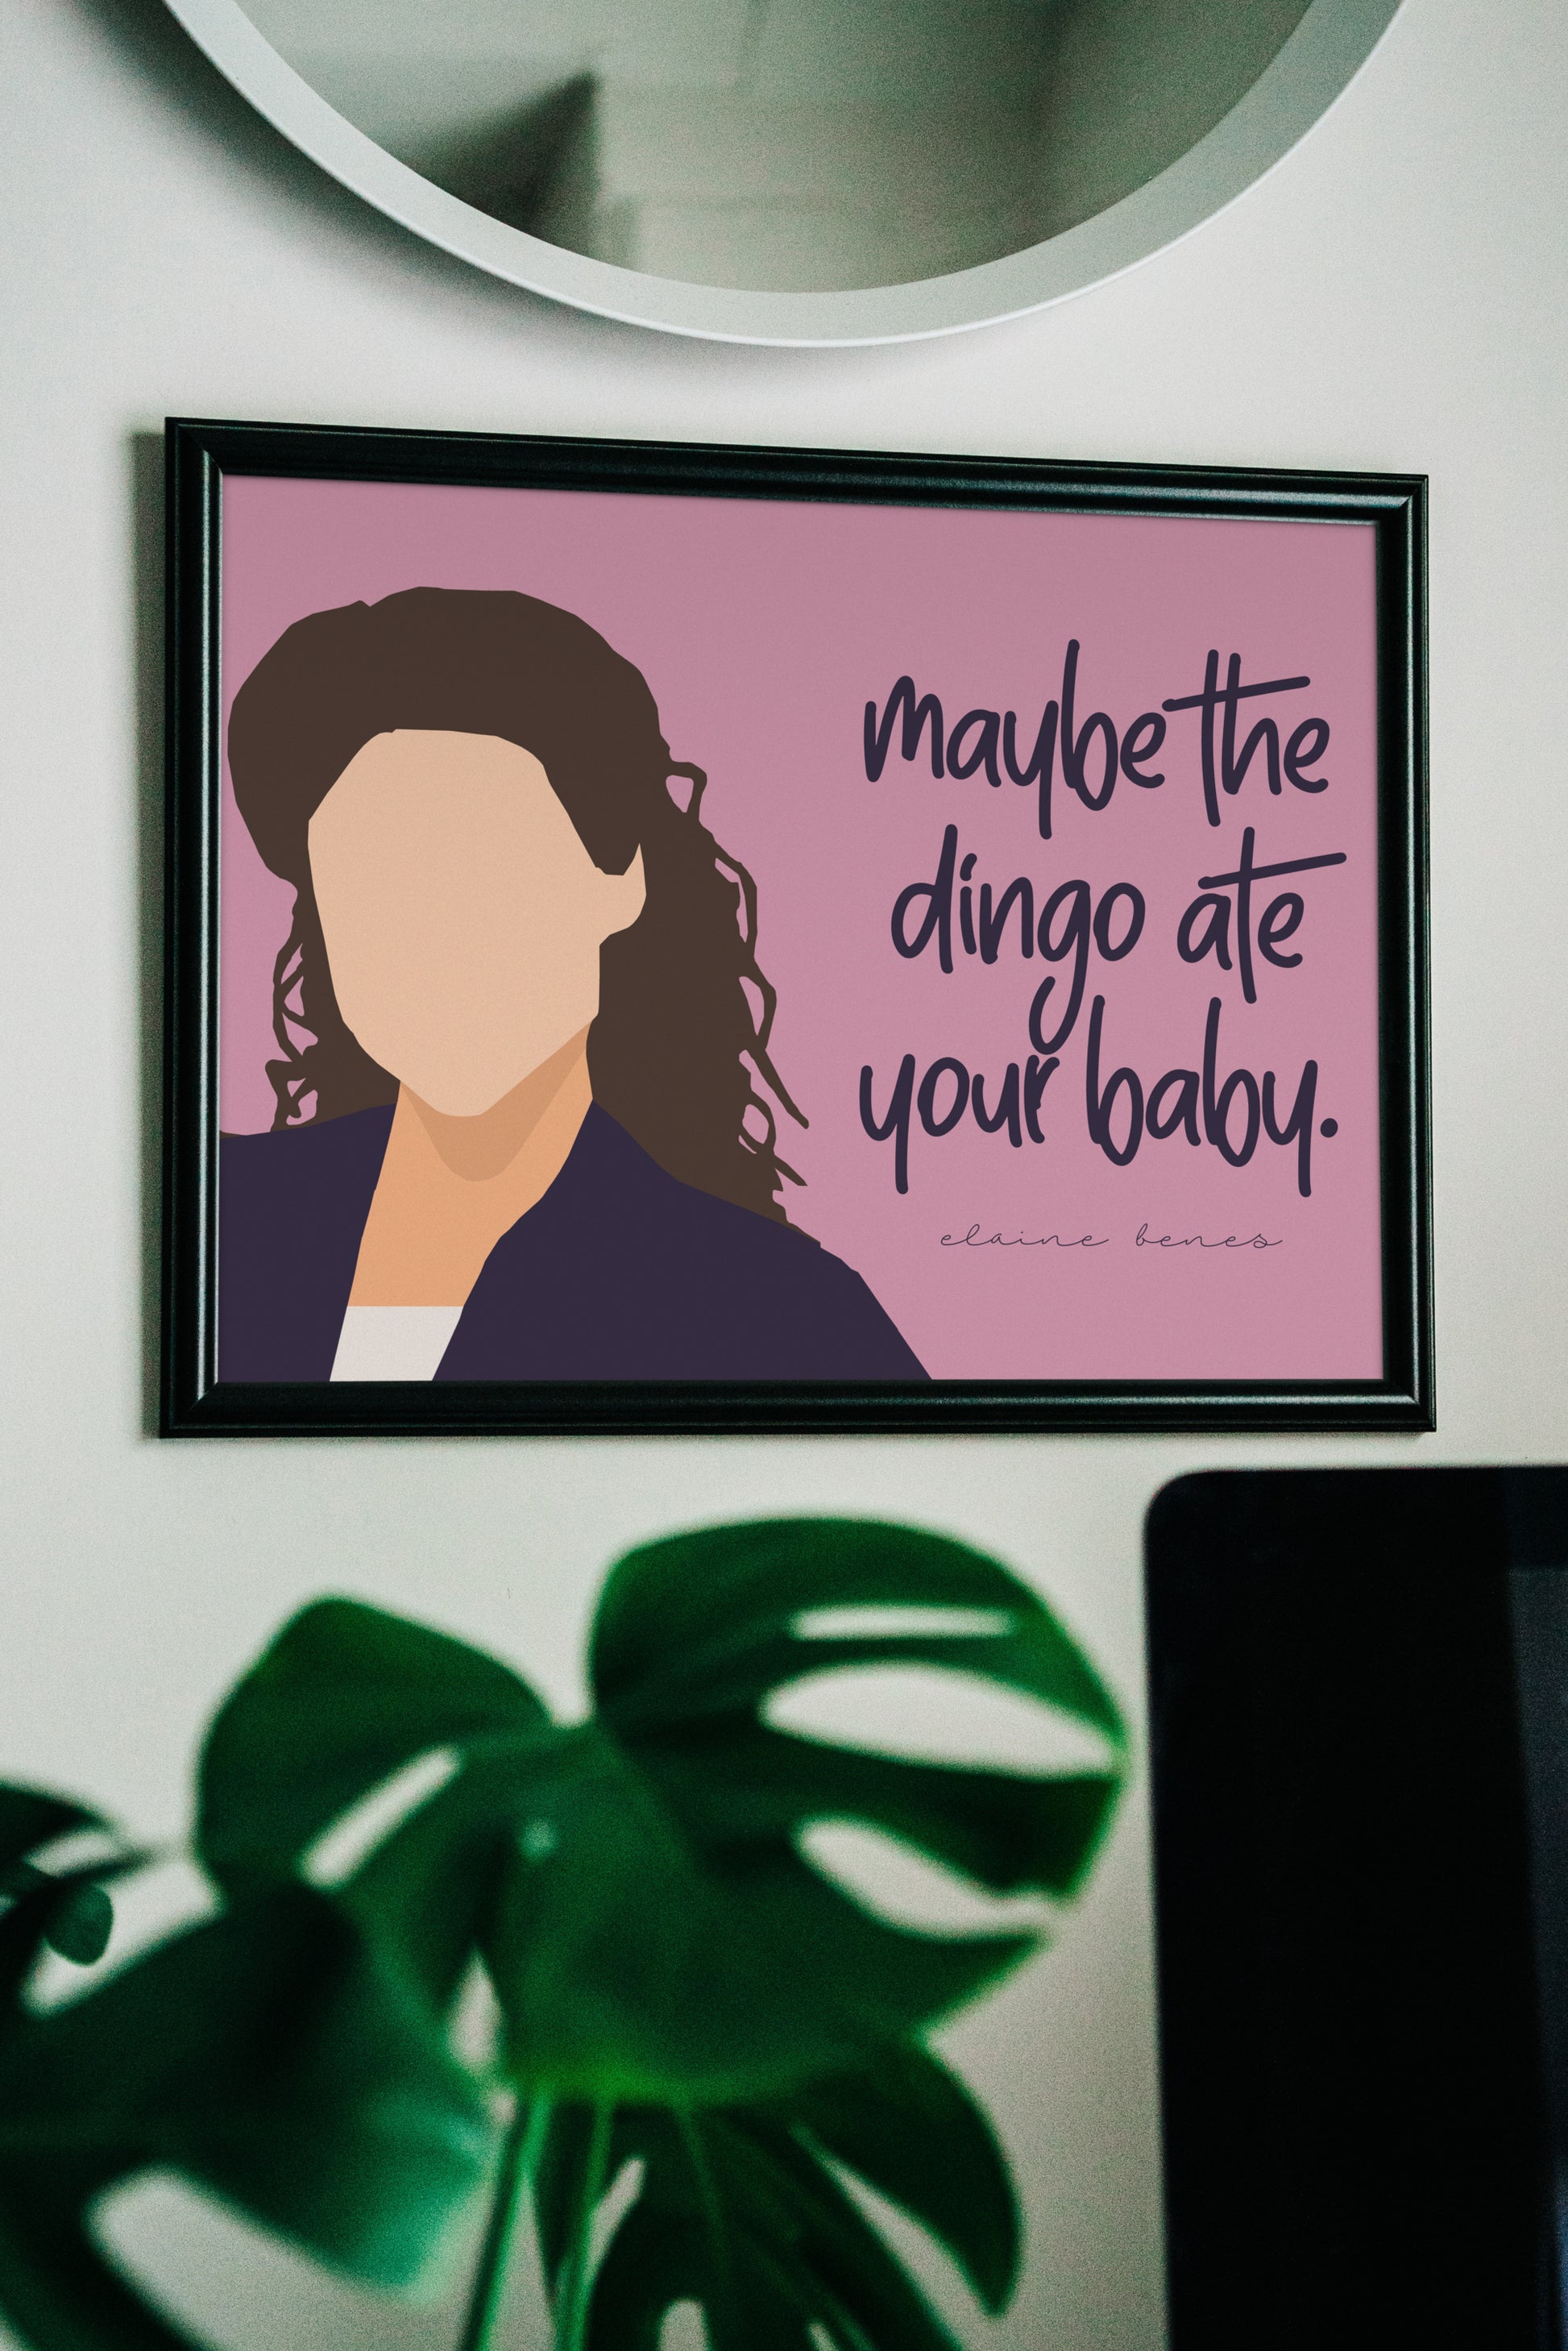 Elaine Benes art poster with quote, "Maybe the dingo ate your baby."